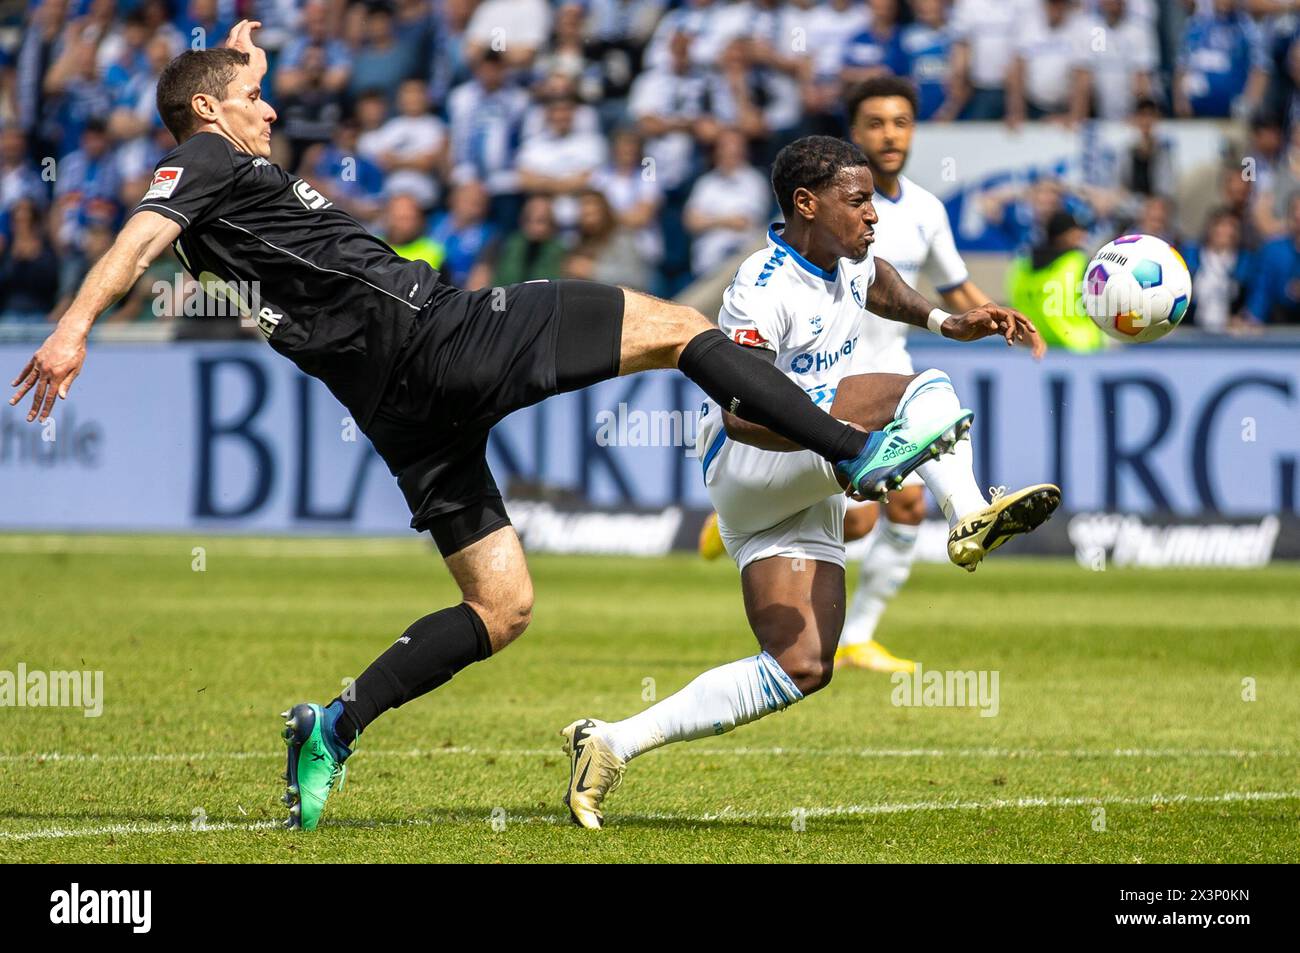 Magdeburg, Germany. 28th Apr, 2024. Soccer: Bundesliga 2, 1. FC Magdeburg - VfL Osnabrück, matchday 31, MDCC-Arena. Osnabrück's Maximilian Thalhammer (l) fights for the ball against 1. FC Magdeburg's Bryan Teixeira. Credit: Andreas Gora/dpa - IMPORTANT NOTE: In accordance with the regulations of the DFL German Football League and the DFB German Football Association, it is prohibited to utilize or have utilized photographs taken in the stadium and/or of the match in the form of sequential images and/or video-like photo series./dpa/Alamy Live News Stock Photo